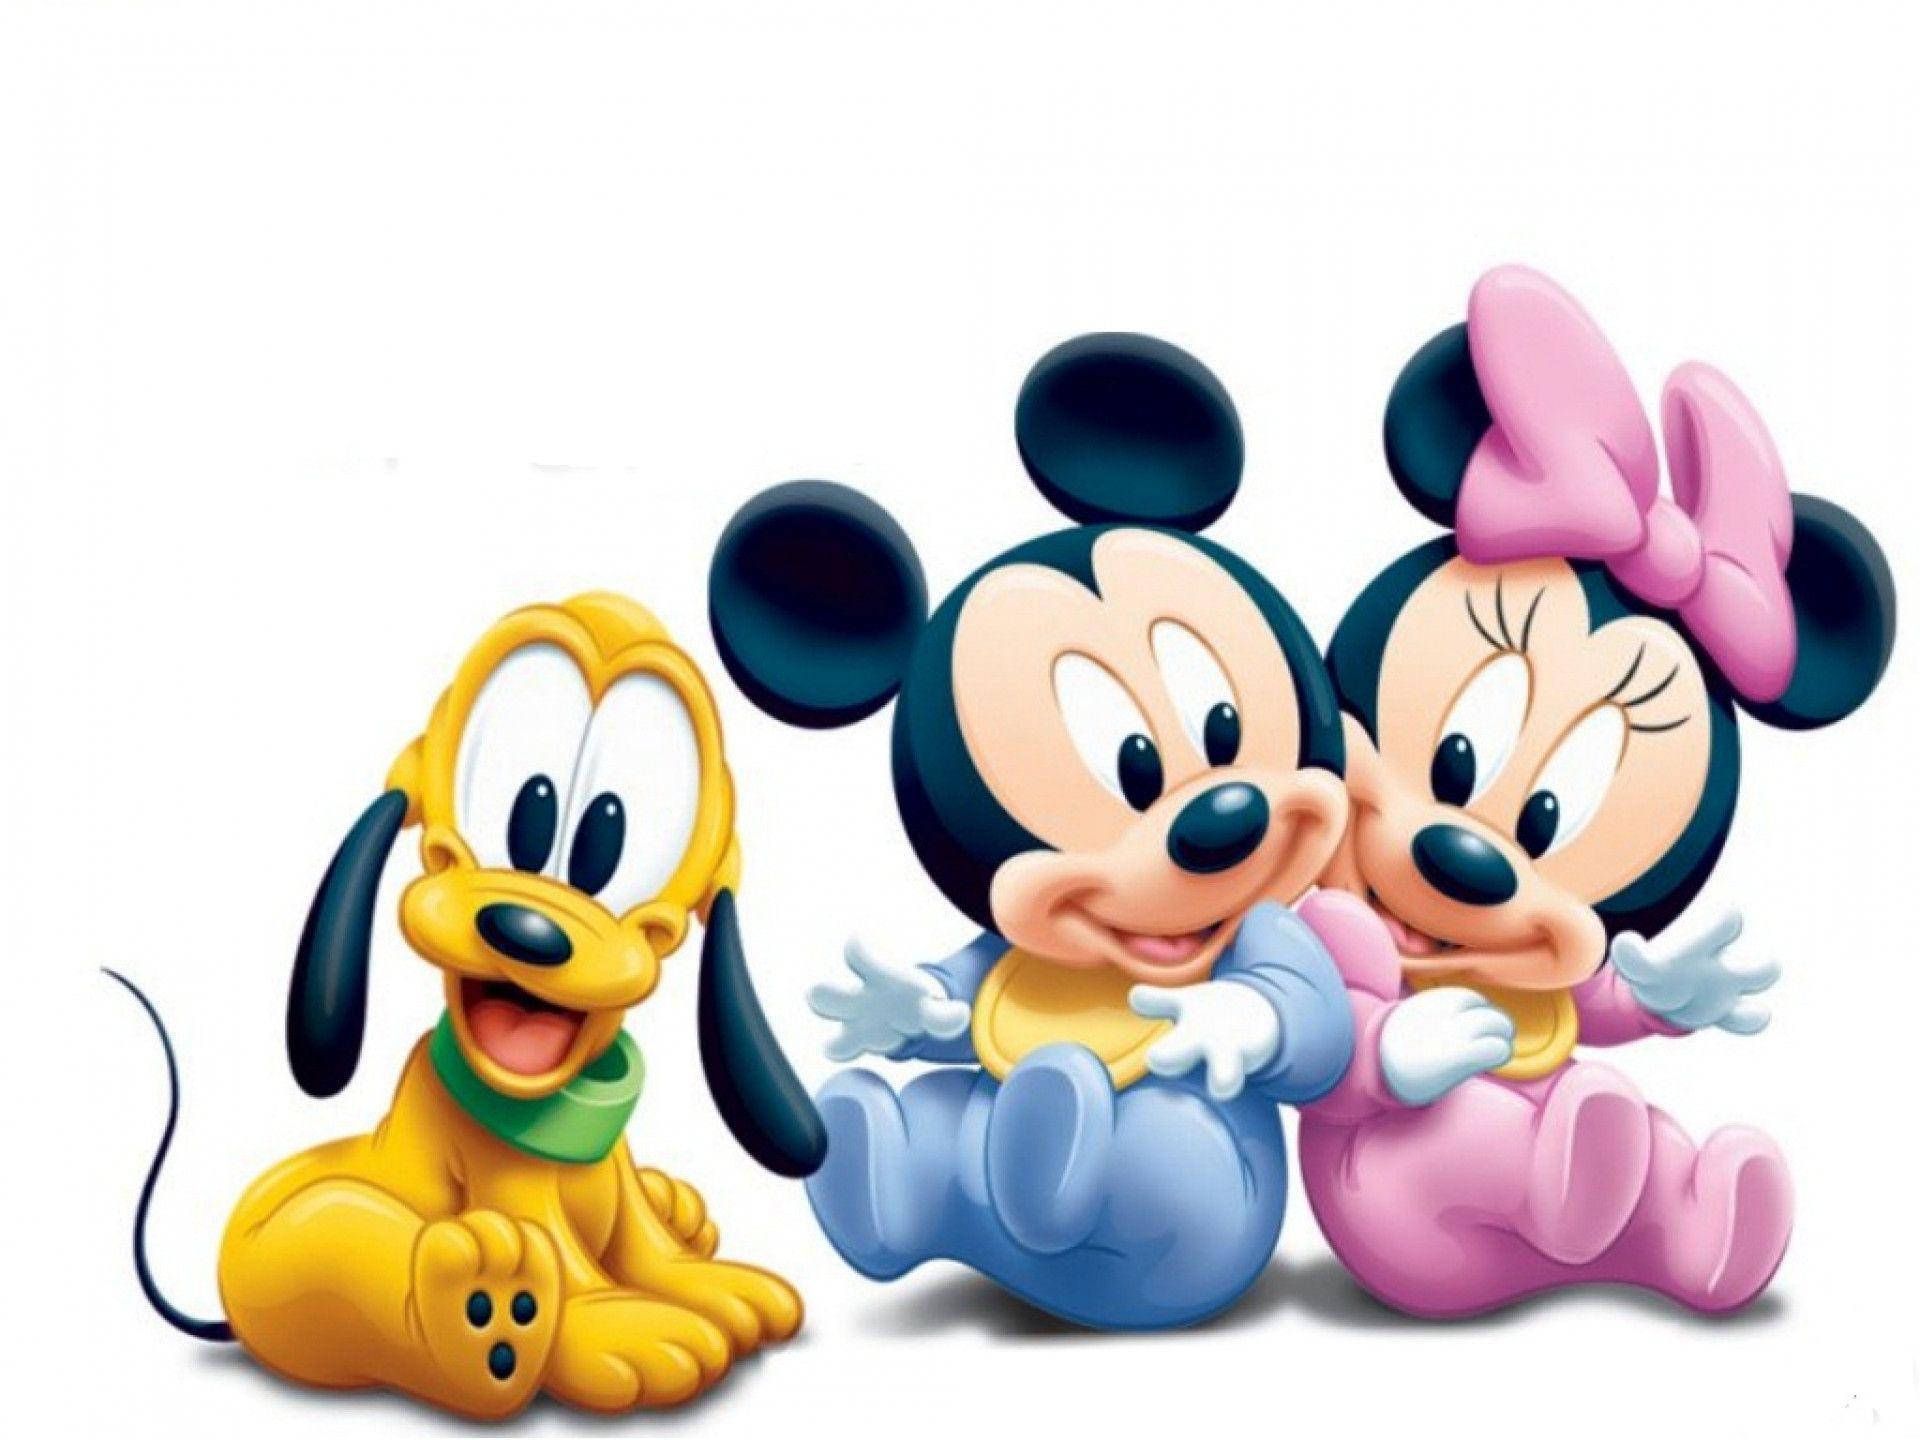 Free Mickey Mouse Wallpaper Downloads, Mickey Mouse Wallpaper for FREE